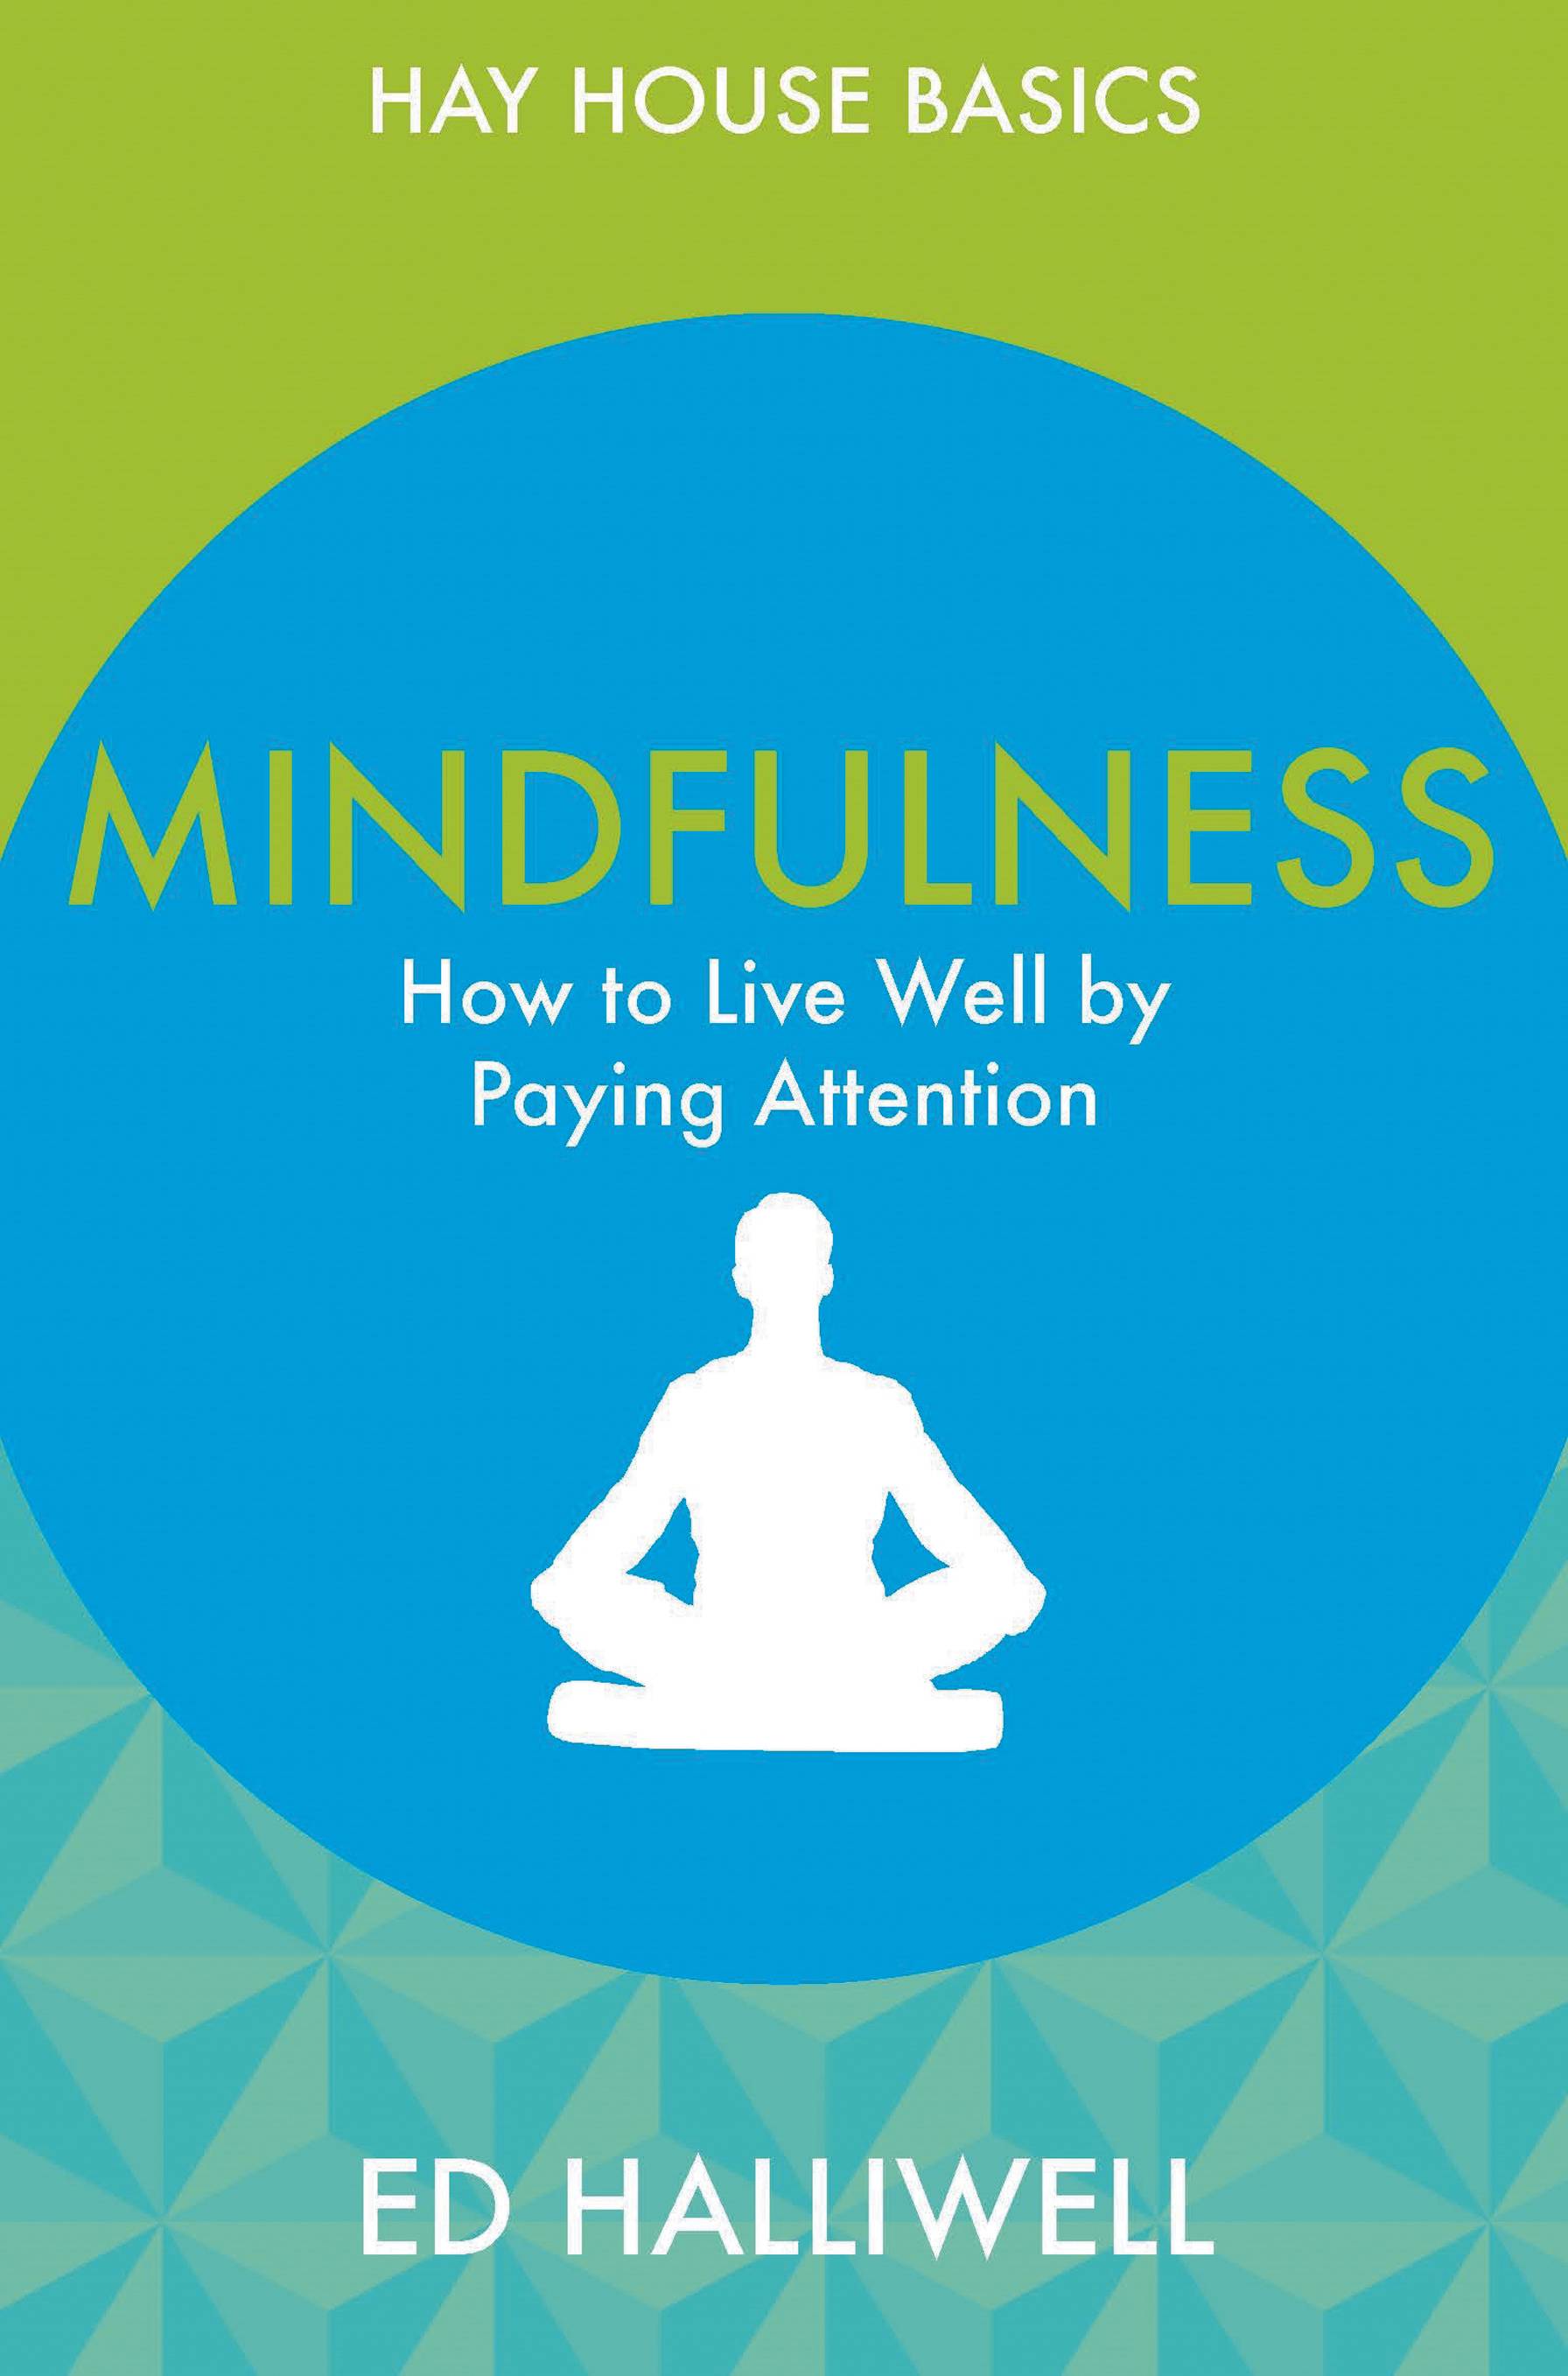 Mindfulness - how to live well by paying attention